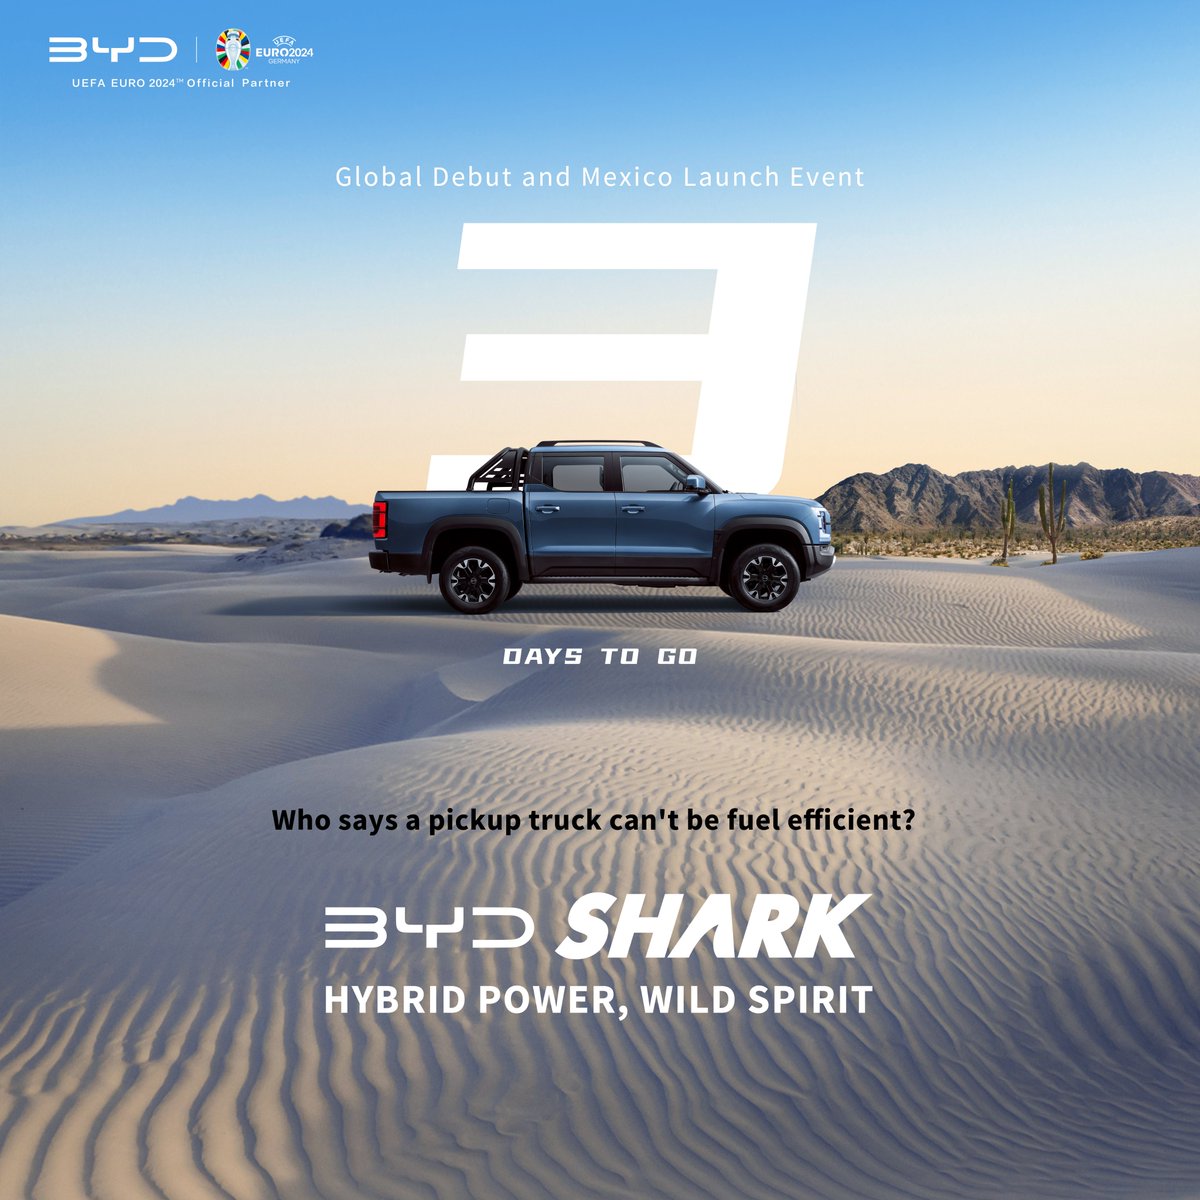 We're 3 days away from the BYD SHARK global debut and launch event in Mexico City, Mexico! Join us as we unveil the future of pickup truck innovations, challenging traditional notions of efficiency. 

🗓 May 14th at 10:30 AM (UTC-6)

#BYD #BuildYourDreams #BYDSHARK